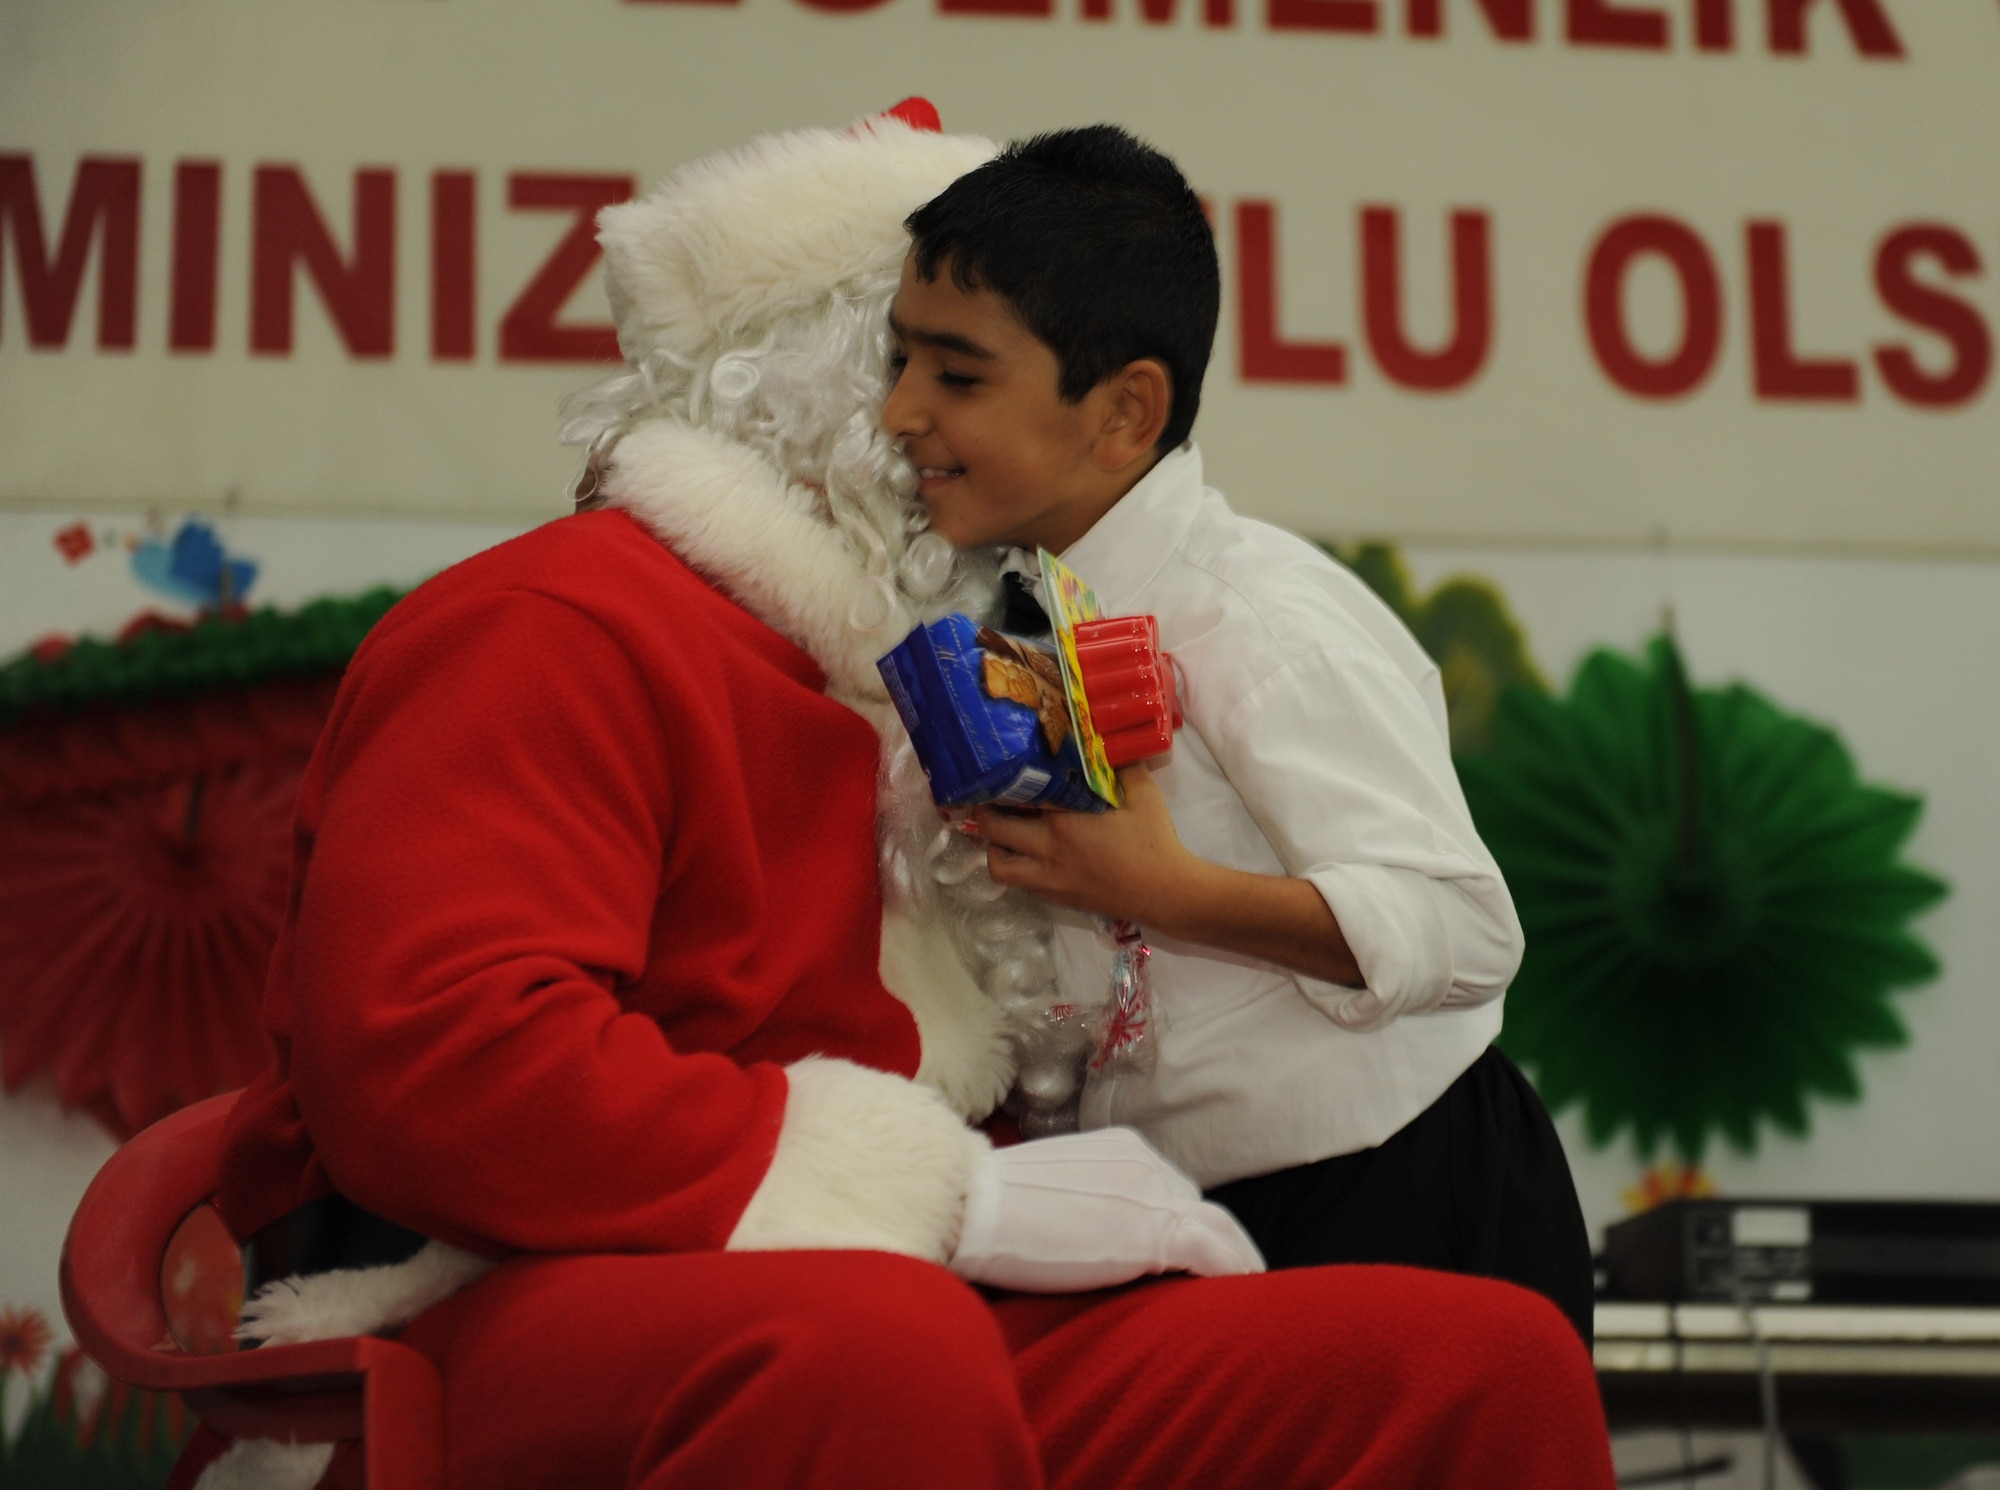 A child gives a hug to St. Nicholas, or Noel Baba as he is known in Turkey, during a New Year’s celebration at the Seyhan Isitme Engelliler Ilkogretim Okulu (Seyhan Hearing Impaired Primary School) Dec. 27, 2012, in Adana, Turkey. Members of the 90th Expeditionary Air Refueling Squadron threw a party for the children at the school as part of an ongoing tradition at Incirlik. (U.S. Air Force photo by Staff Sgt. Marissa Tucker/Released)